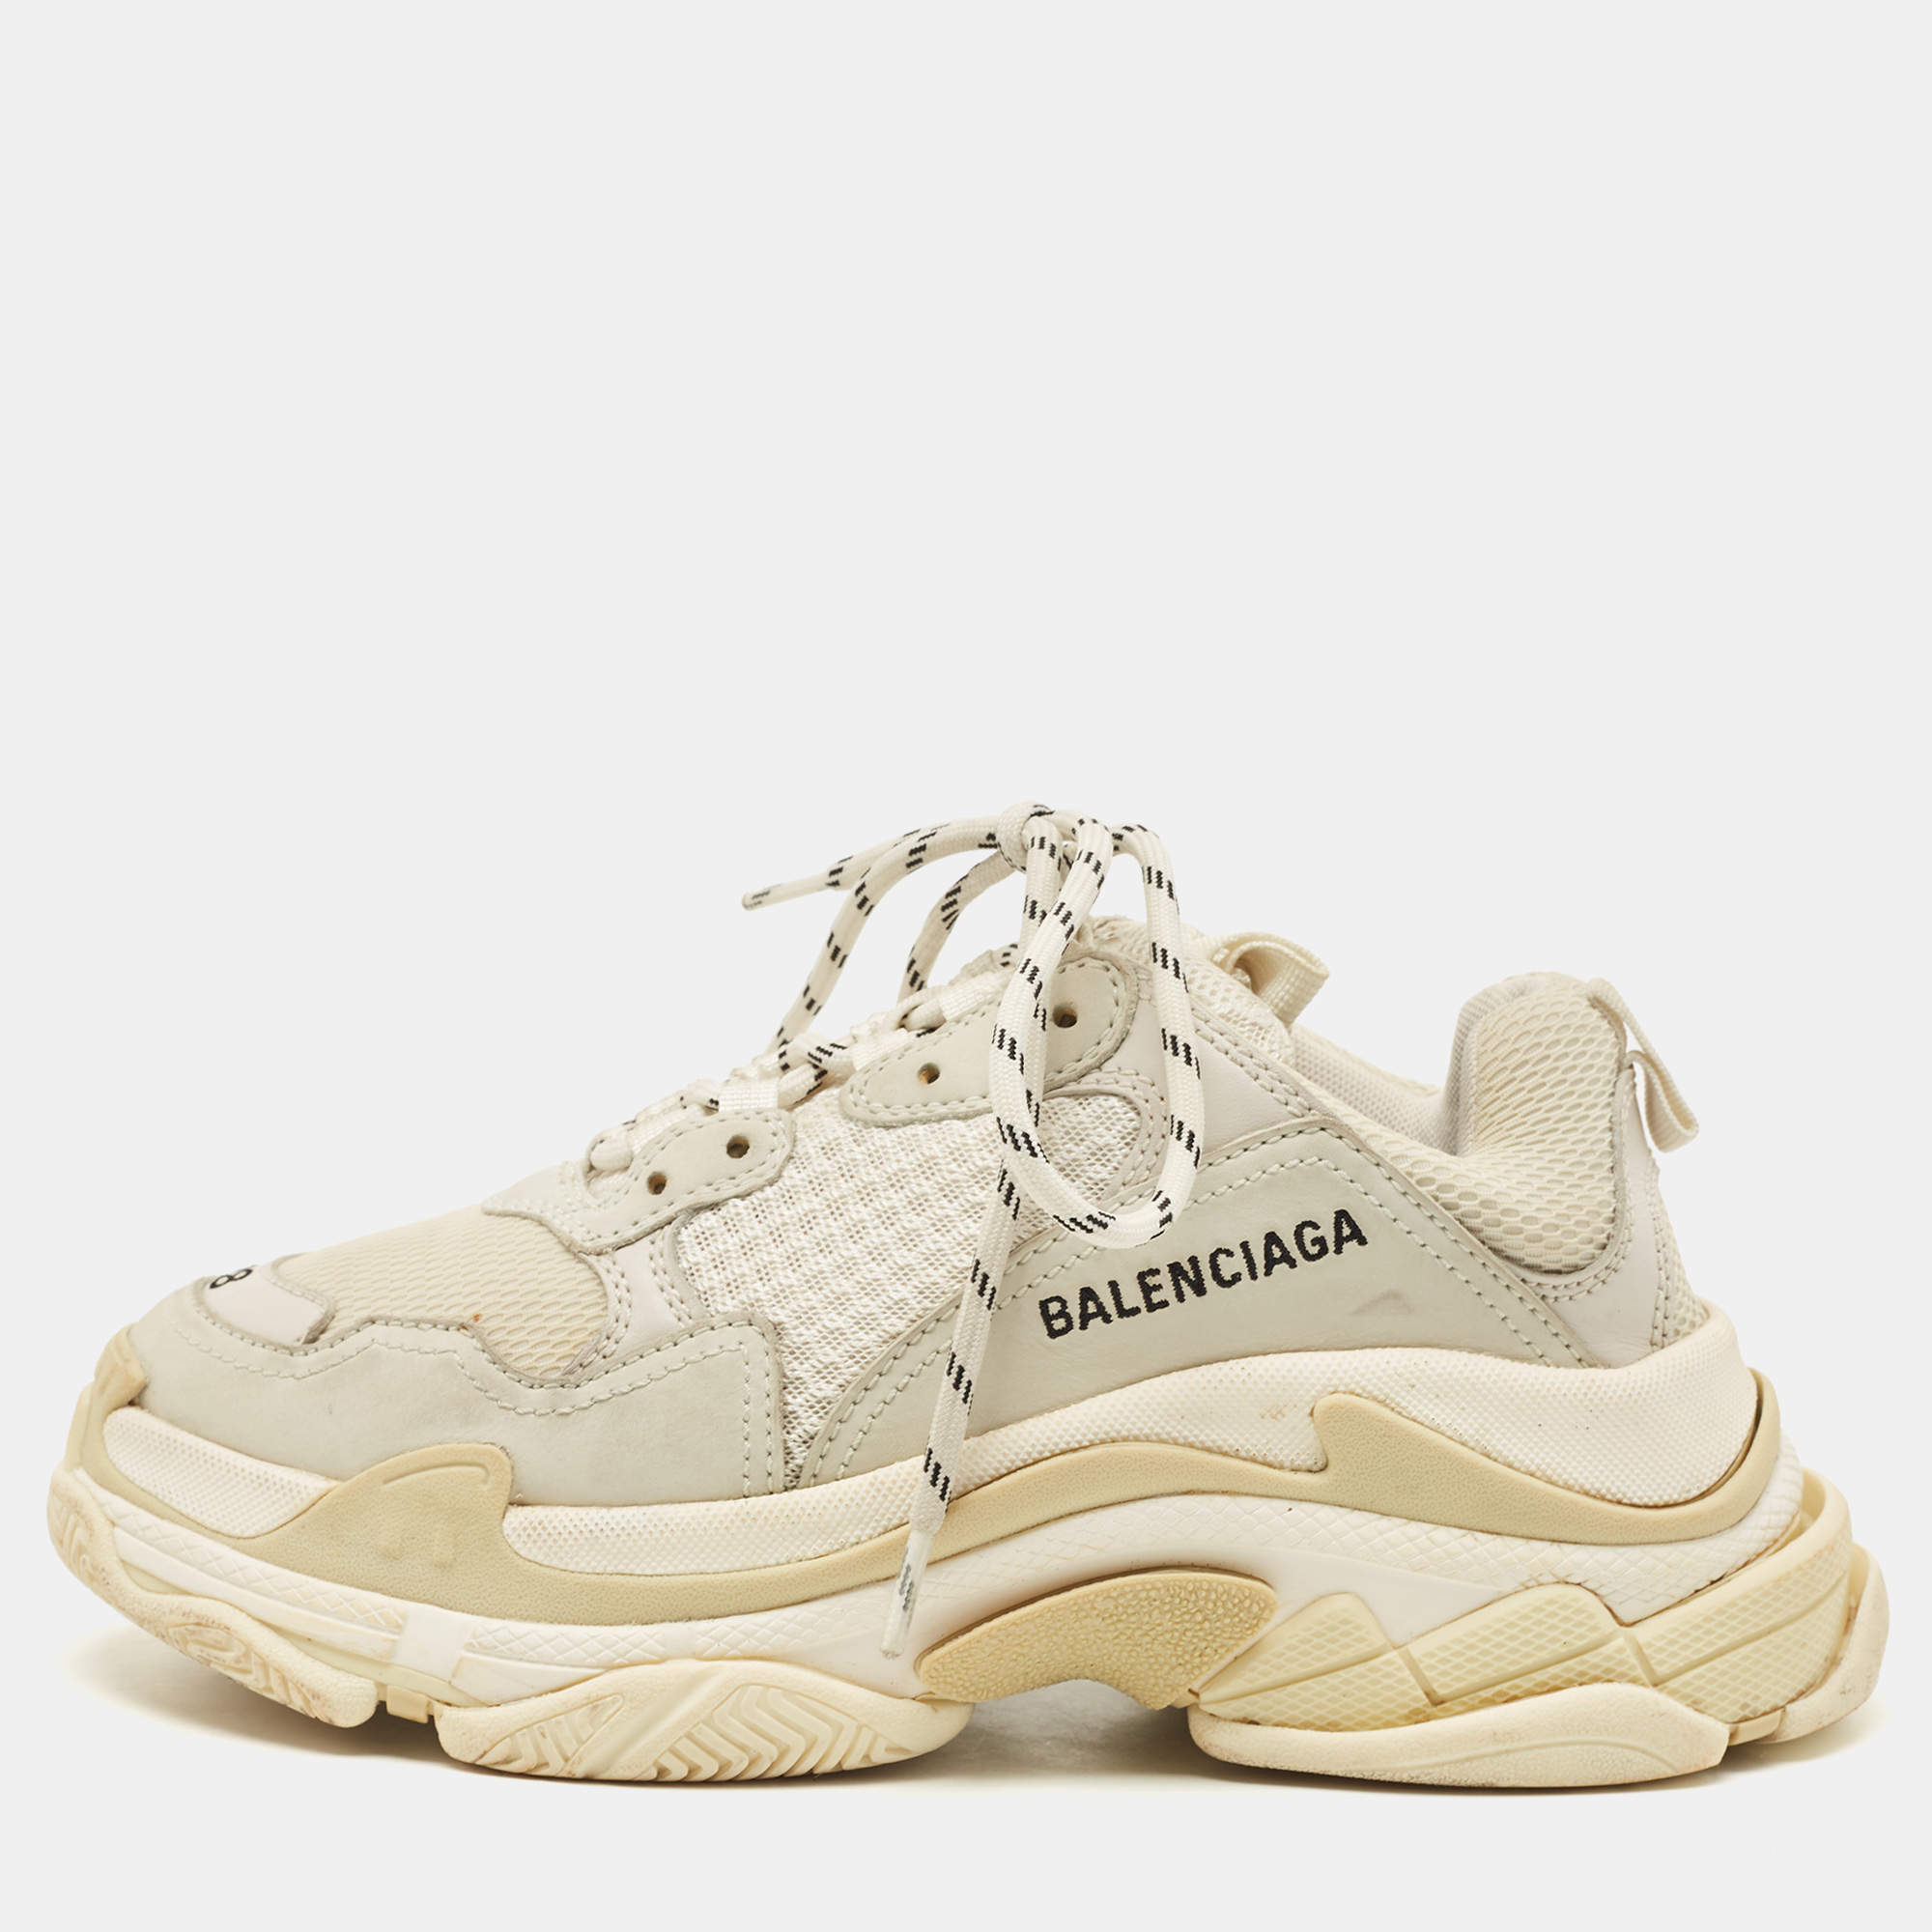 Balenciaga White/Grey Mesh and Leather Triple S Sneakers Size 38